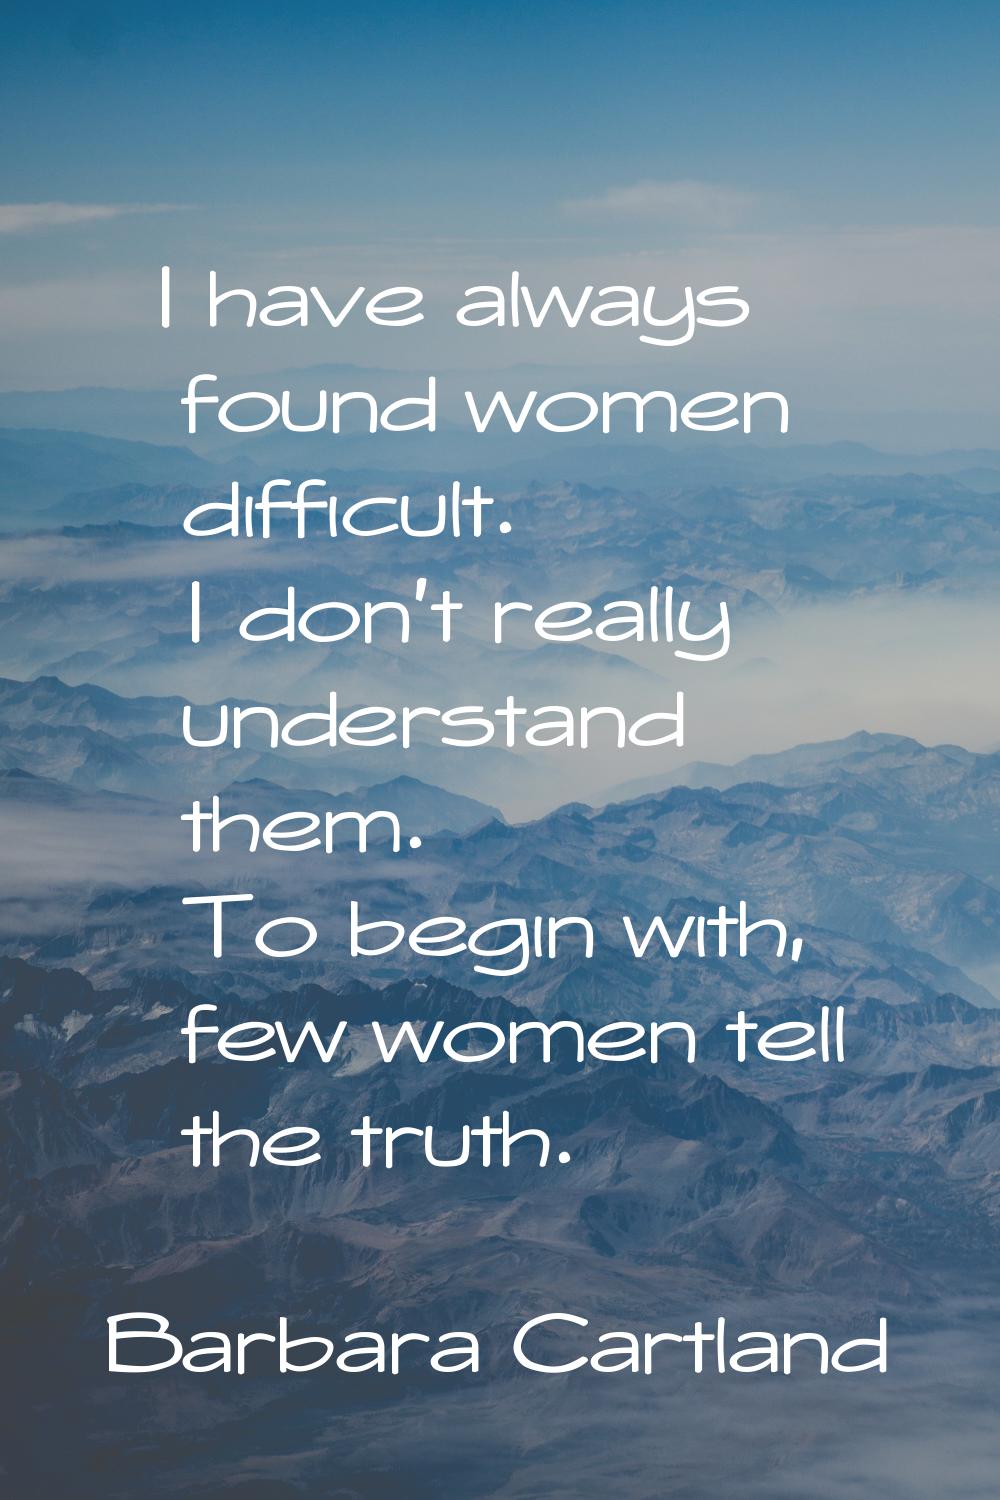 I have always found women difficult. I don't really understand them. To begin with, few women tell 